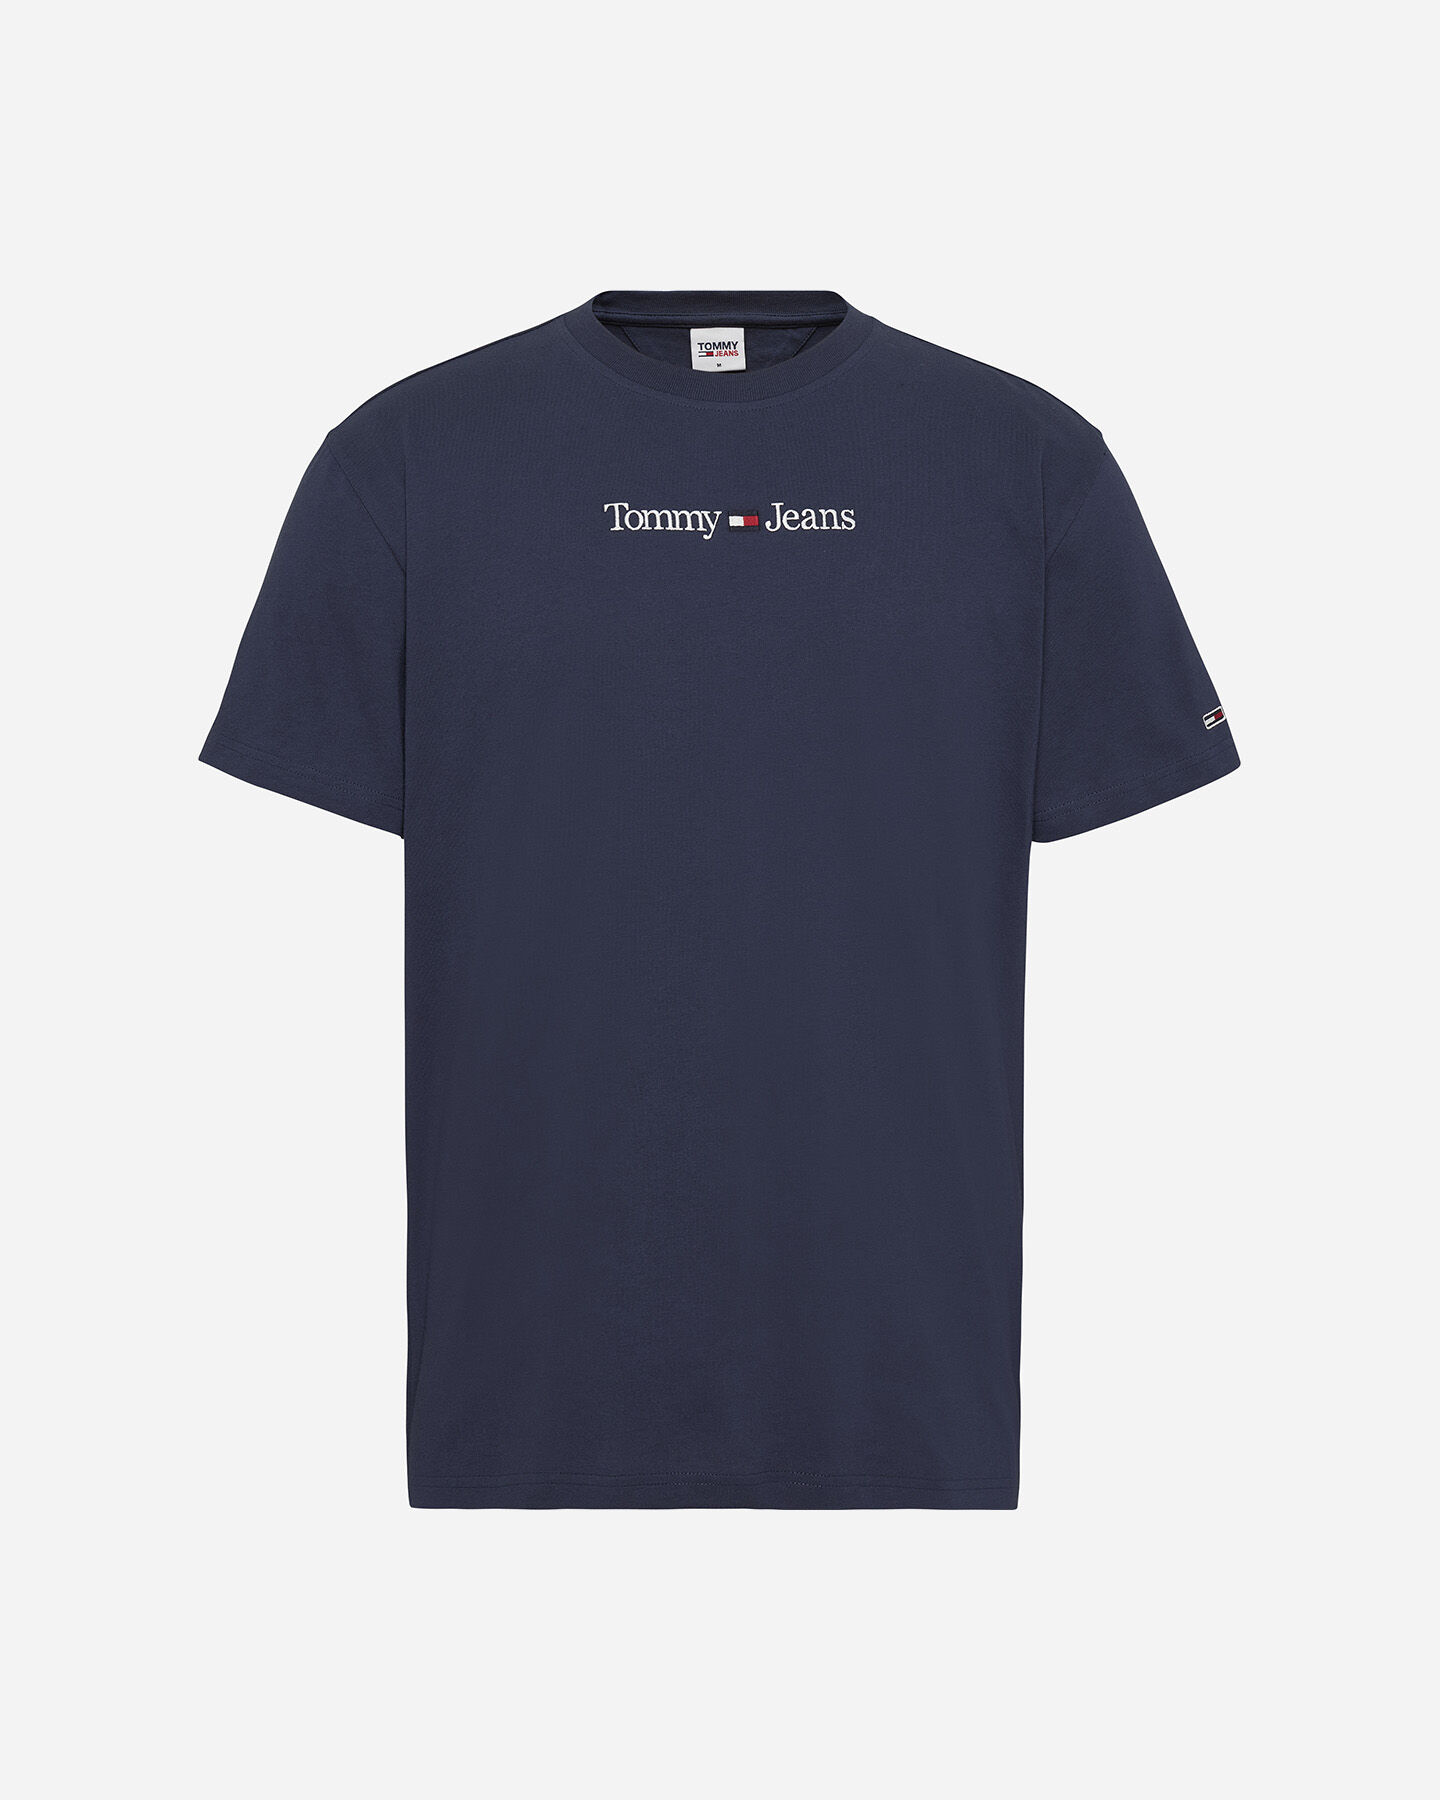  T-Shirt TOMMY HILFIGER LINEAR LOGO M S4122761|C87|S scatto 0